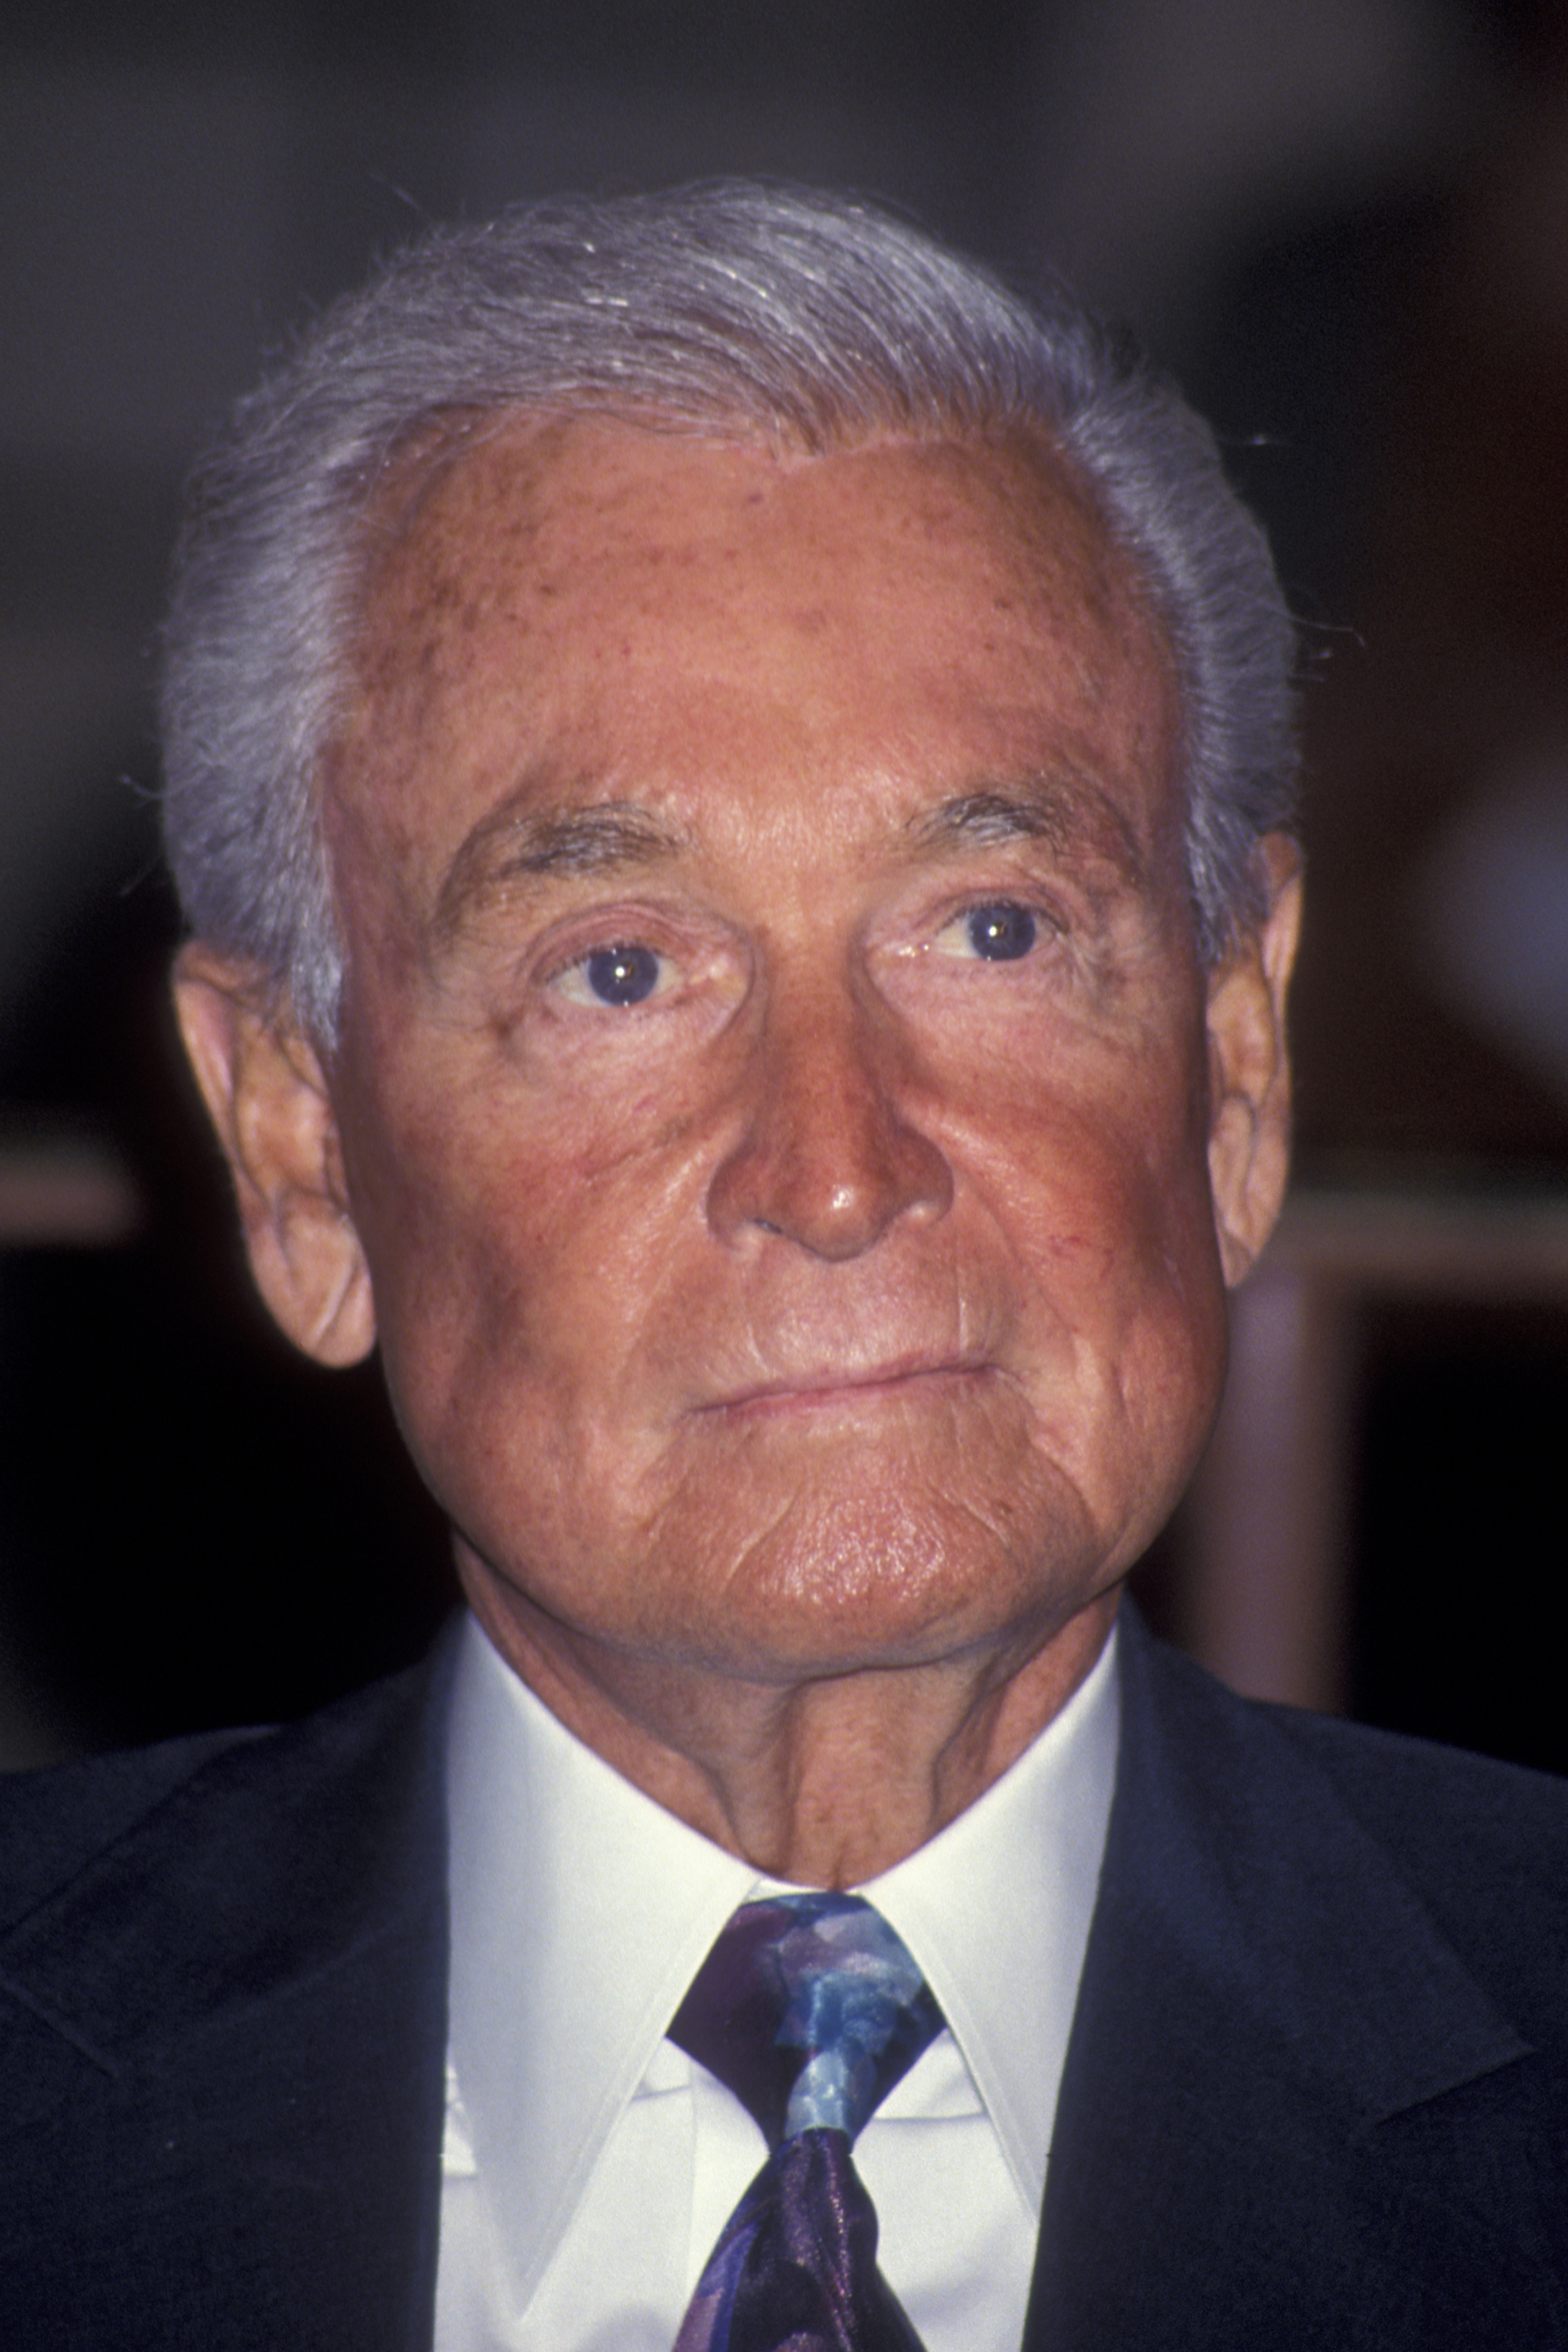 Bob Barker pictured at a press conference in New York City, 1994 | Source: Getty Images